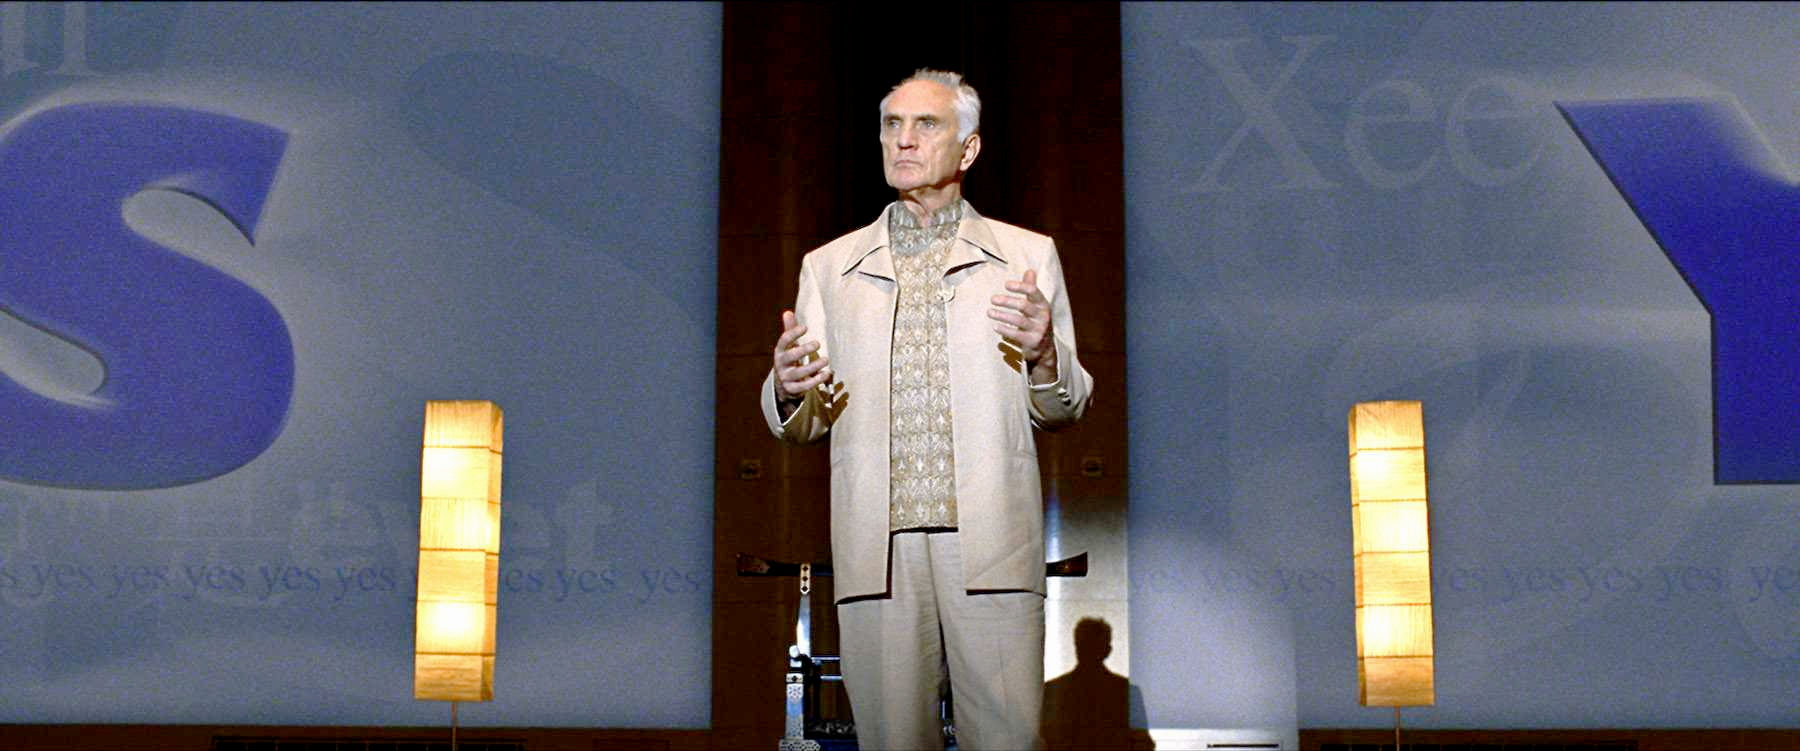 Terence Stamp stars as Terrence Bundley in Warner Bros. Pictures' Yes Man (2008)